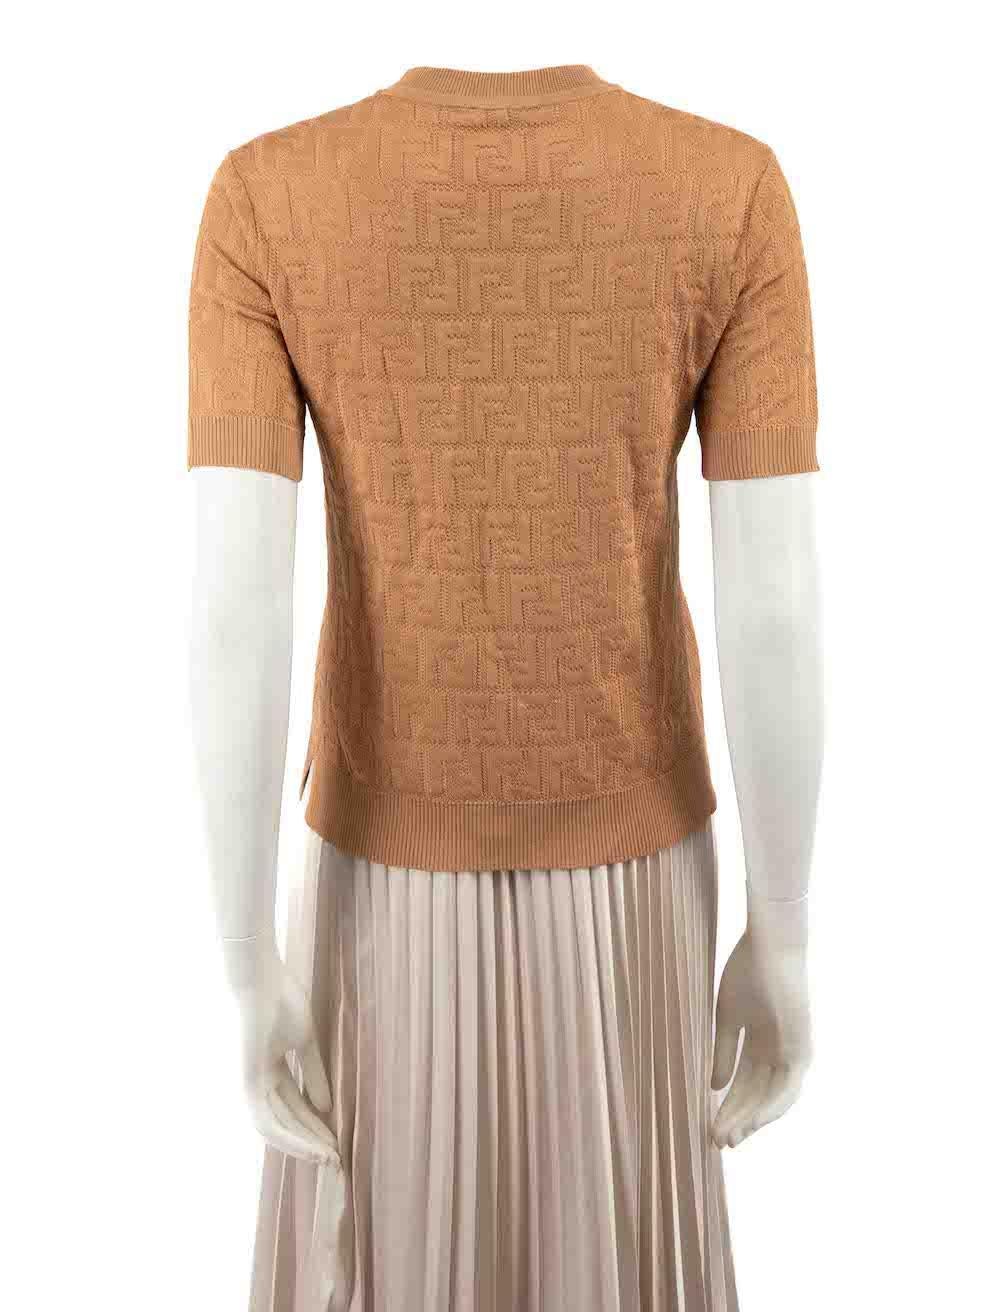 Fendi Brown Logo Knit FF Motif Top Size XS In Good Condition For Sale In London, GB